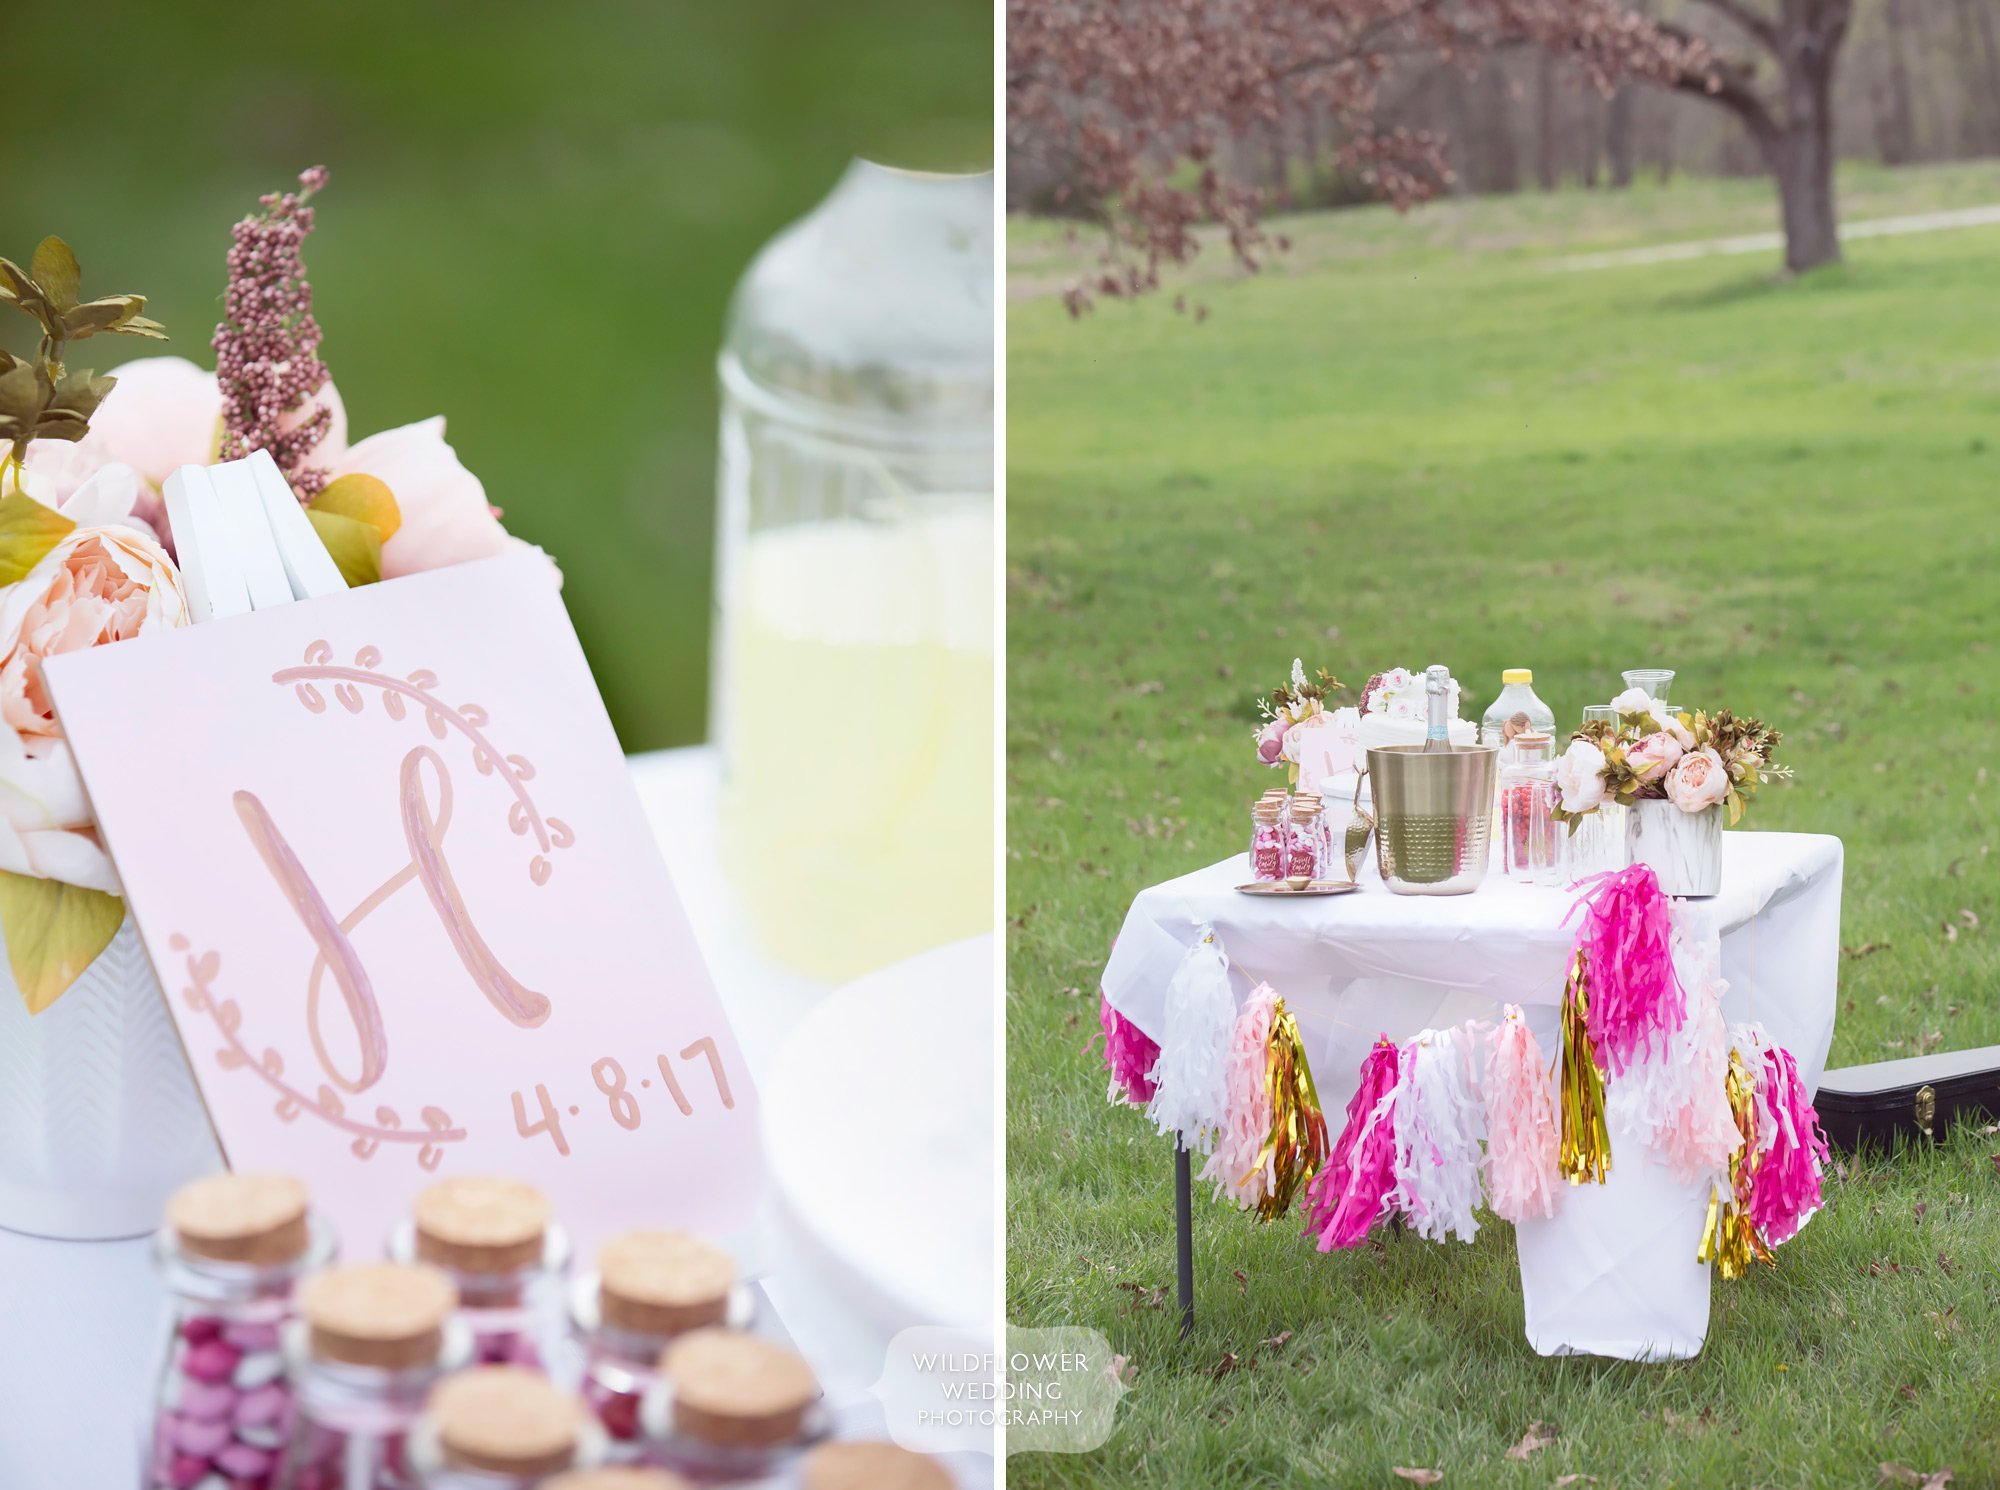 Simple party decor for an outdoor elopement wedding ceremony at Nifong Park.